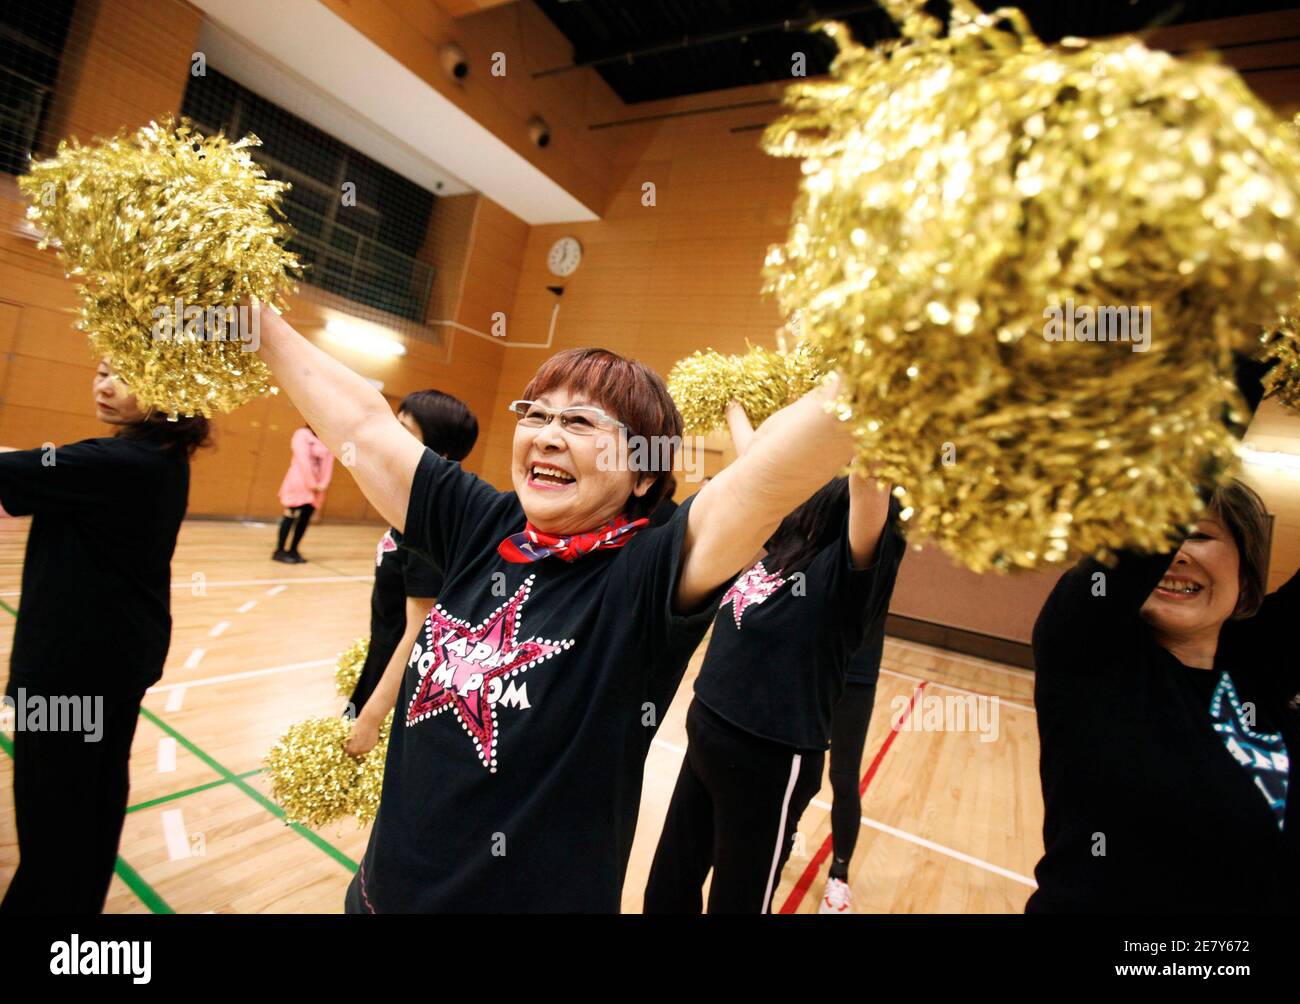 Fumie Takino, a 78-year-old cheerleader, practices cheerleading with other members of a seniors' cheerleading group called "Japan Pom Pom" in Tokyo March 24, 2010. Japan may have to celebrate with its